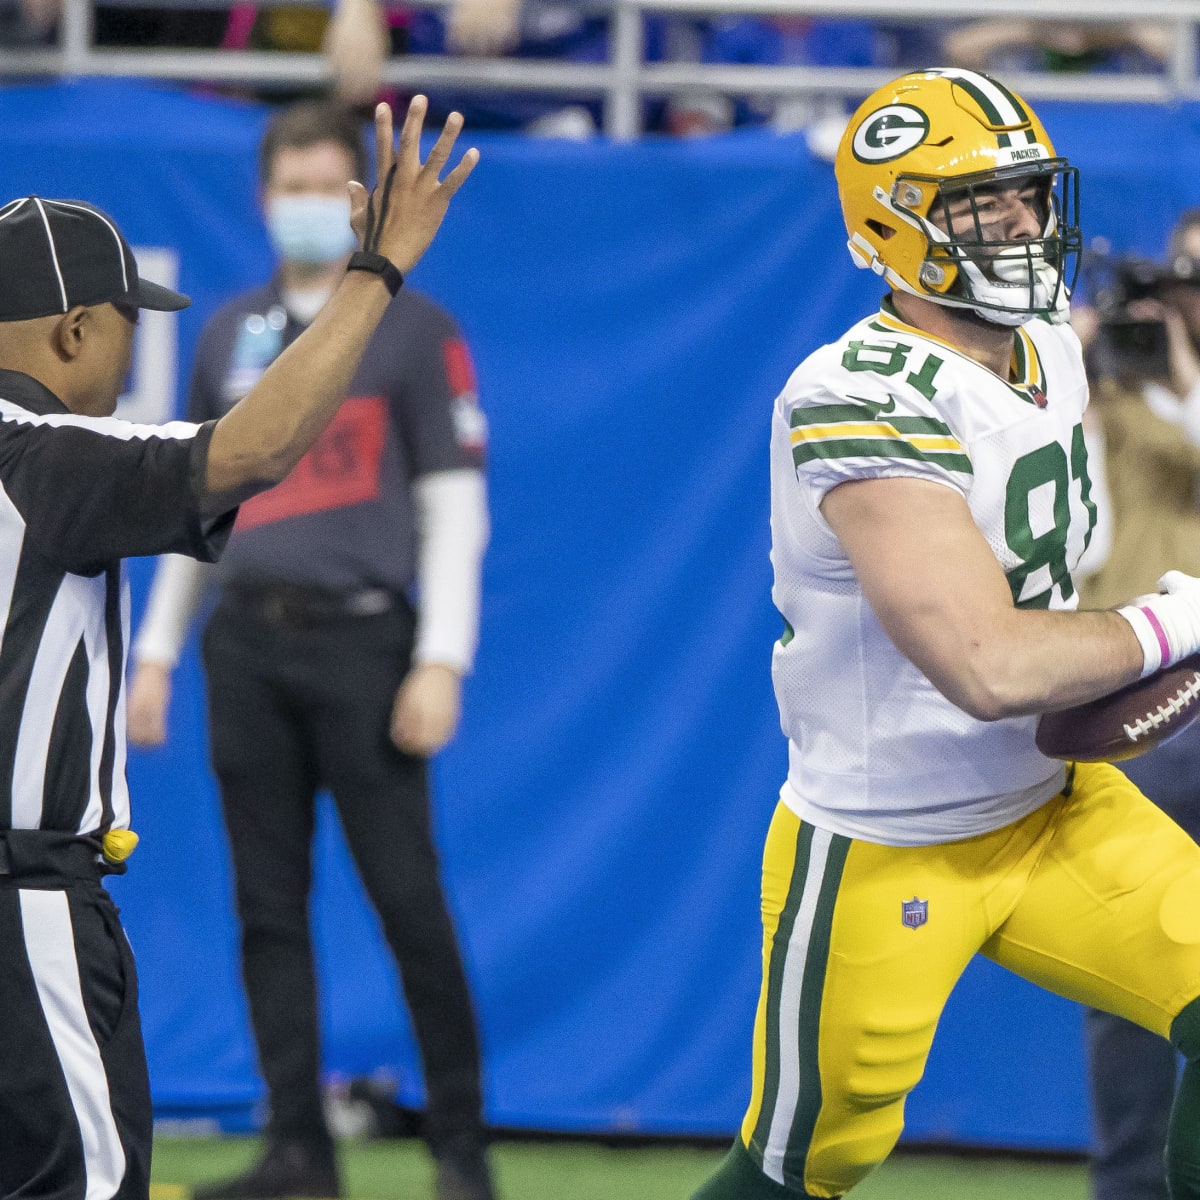 Packers vs. Lions, How to watch, stream & listen